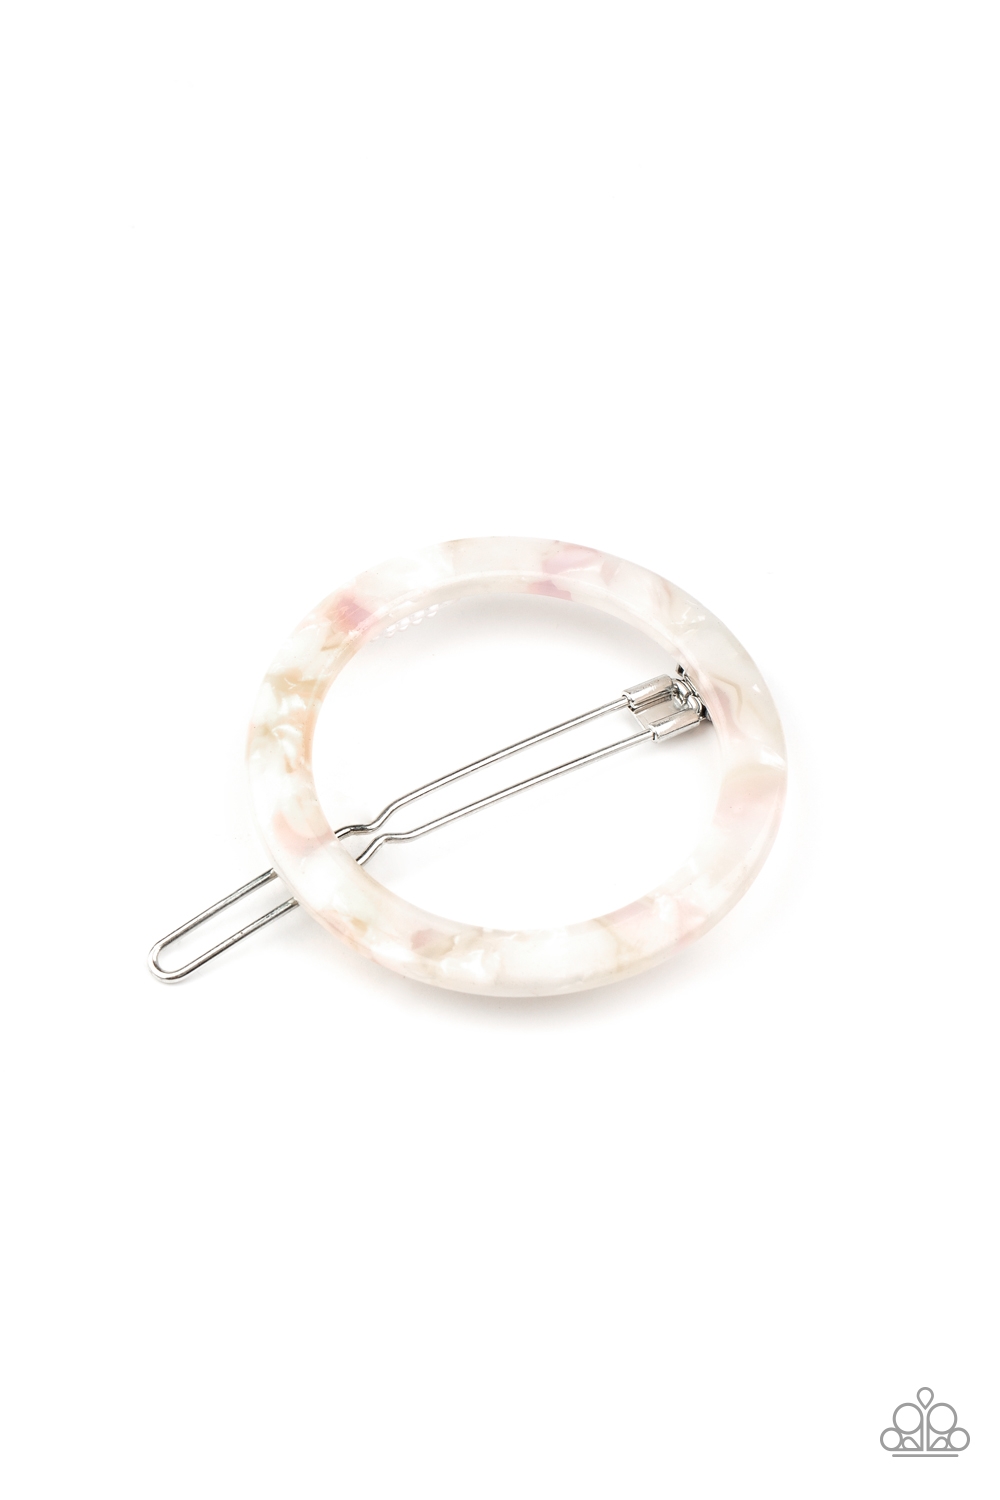 HairClip - In The Round - White